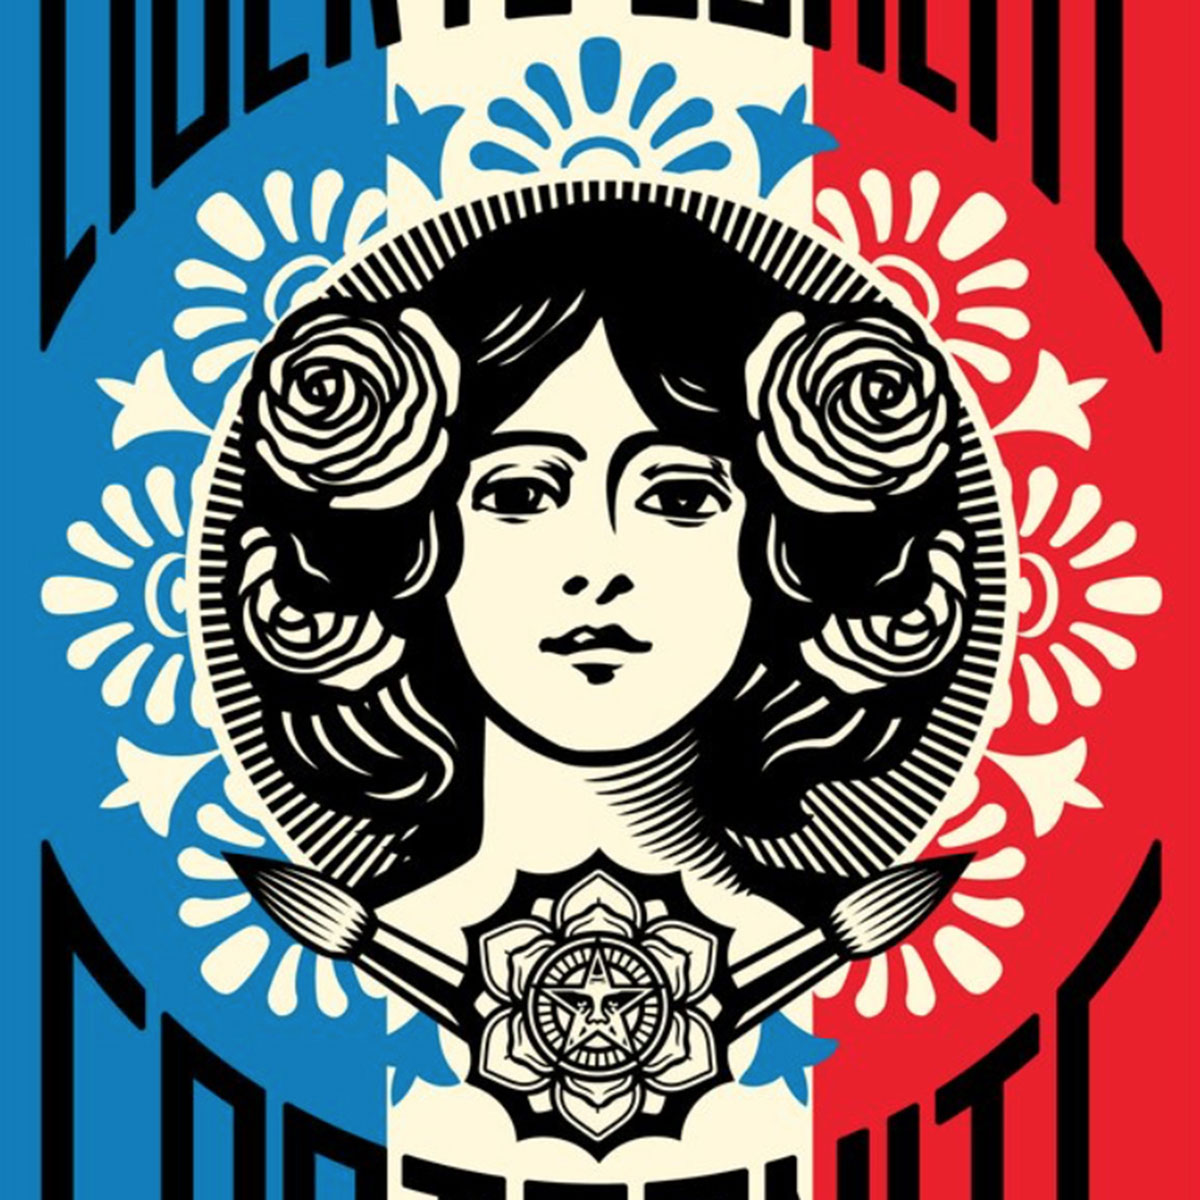 Sheipard Fairey Obey